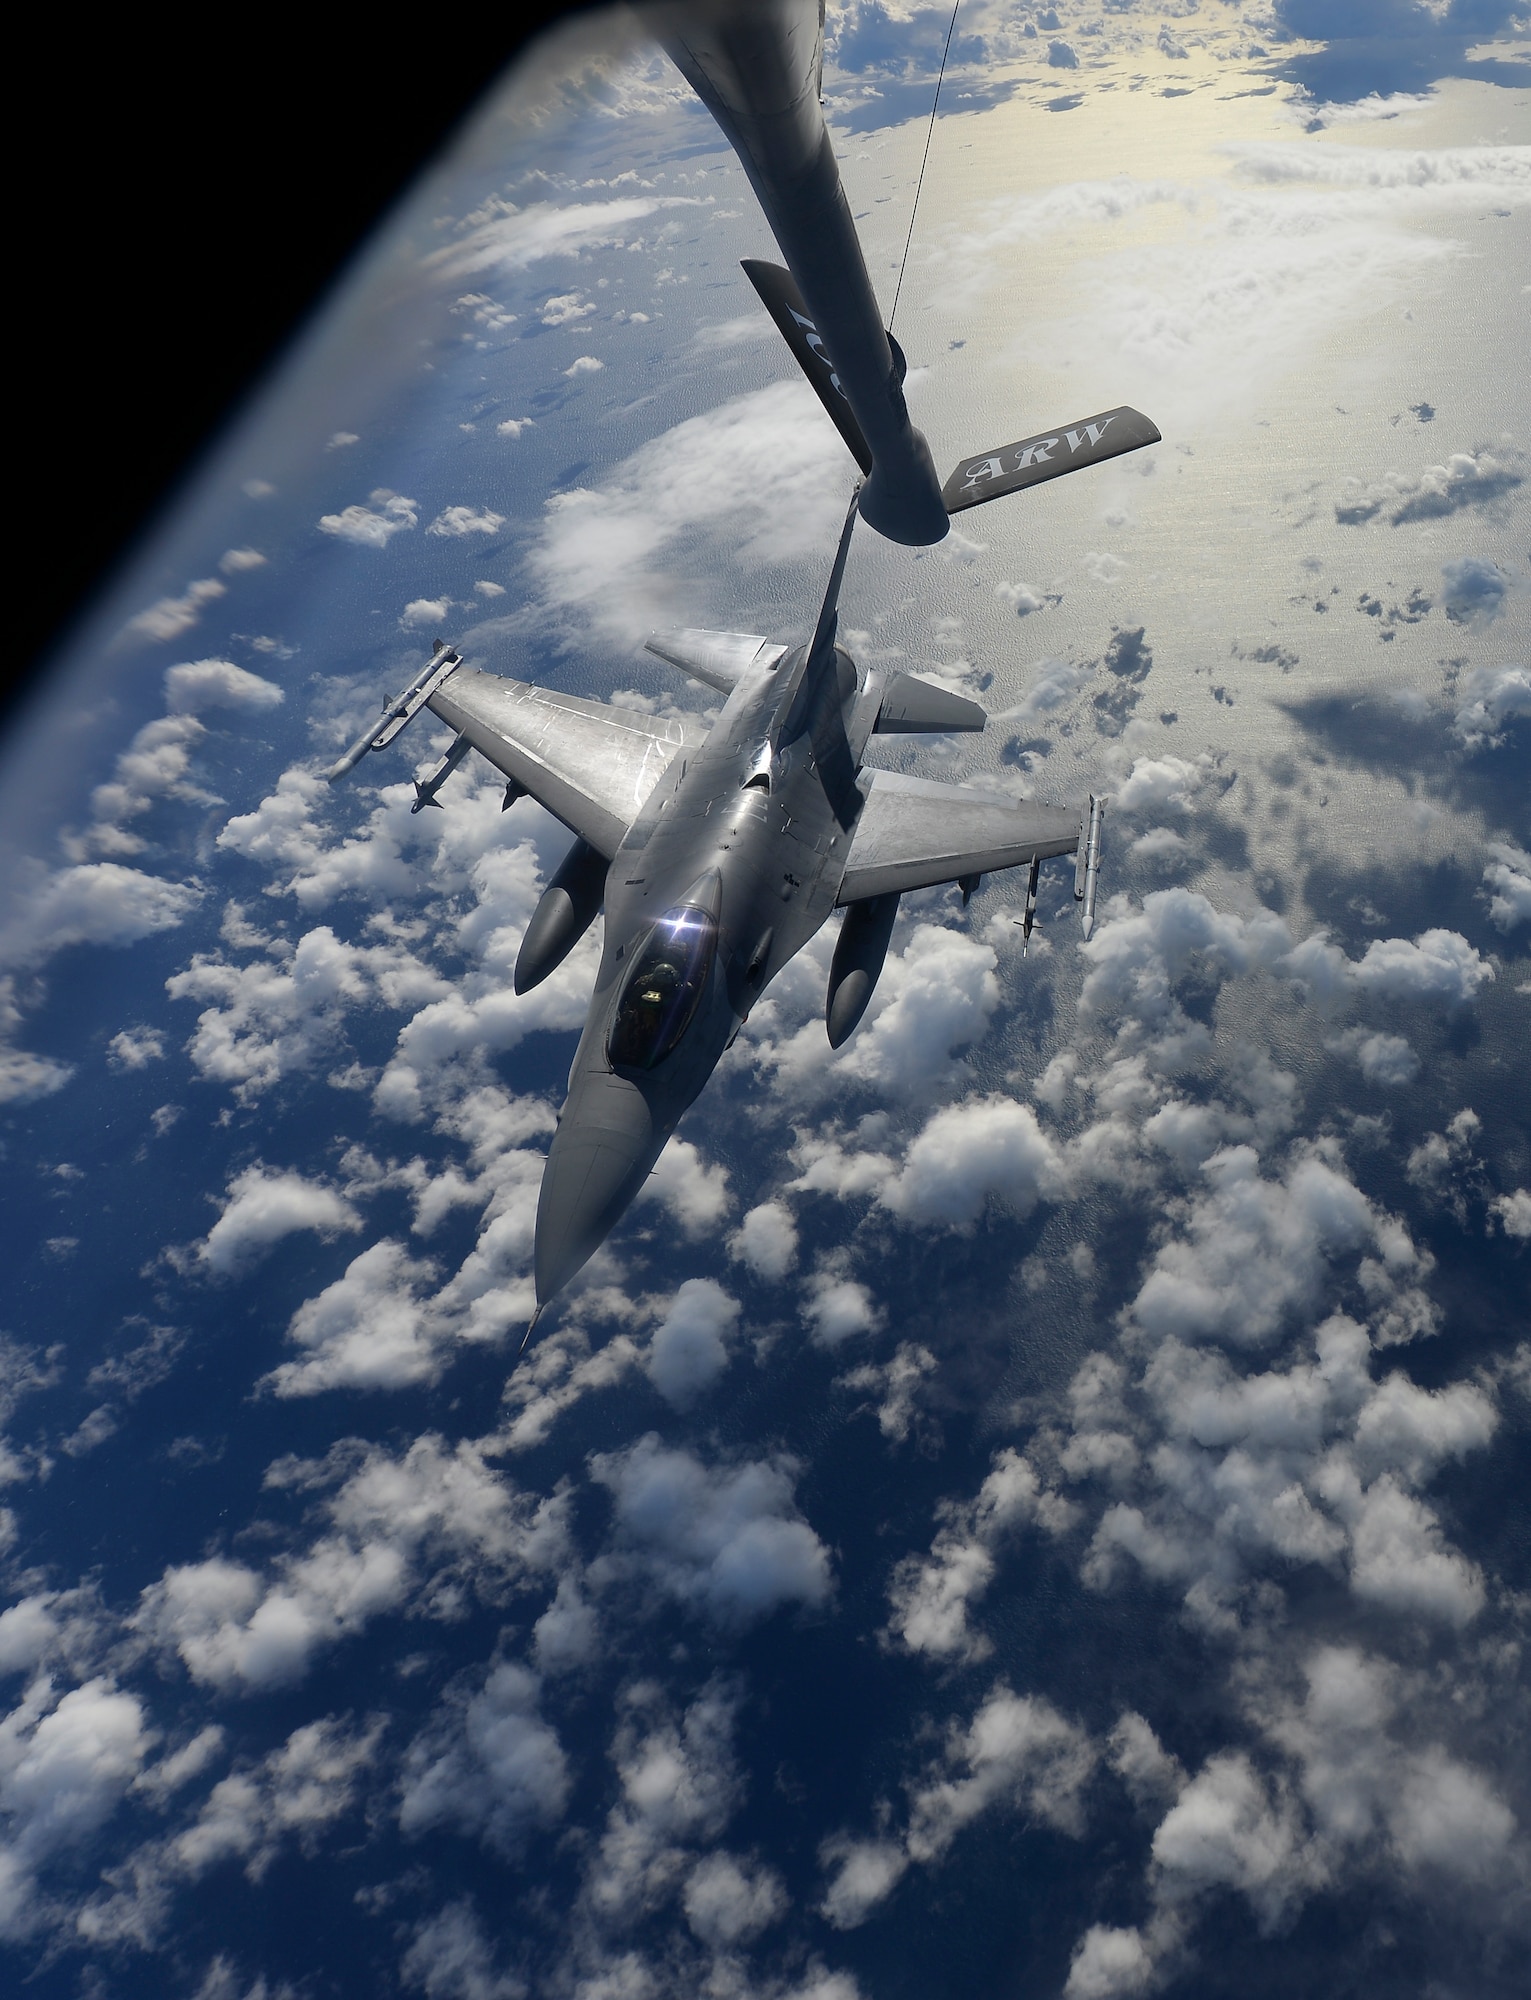 A U.S. Air Force F-16 Fighting Falcon assigned to the 31st Fighter Wing, Aviano Air Base, Italy, breaks away after receiving fuel over the Mediterranean Sea from a KC-135 Stratotanker assigned to the 100th Air Refueling Wing, RAF Mildenhall, England, during Exercise Tonnerre Lighting Nov. 9, 2016. Training exercises such as Tonnerre Lightning enable the U.S., U.K., and France to enhance their mutual abilities to work together toward regional security. (U.S. Air Force photo by Staff Sgt. Micaiah Anthony)